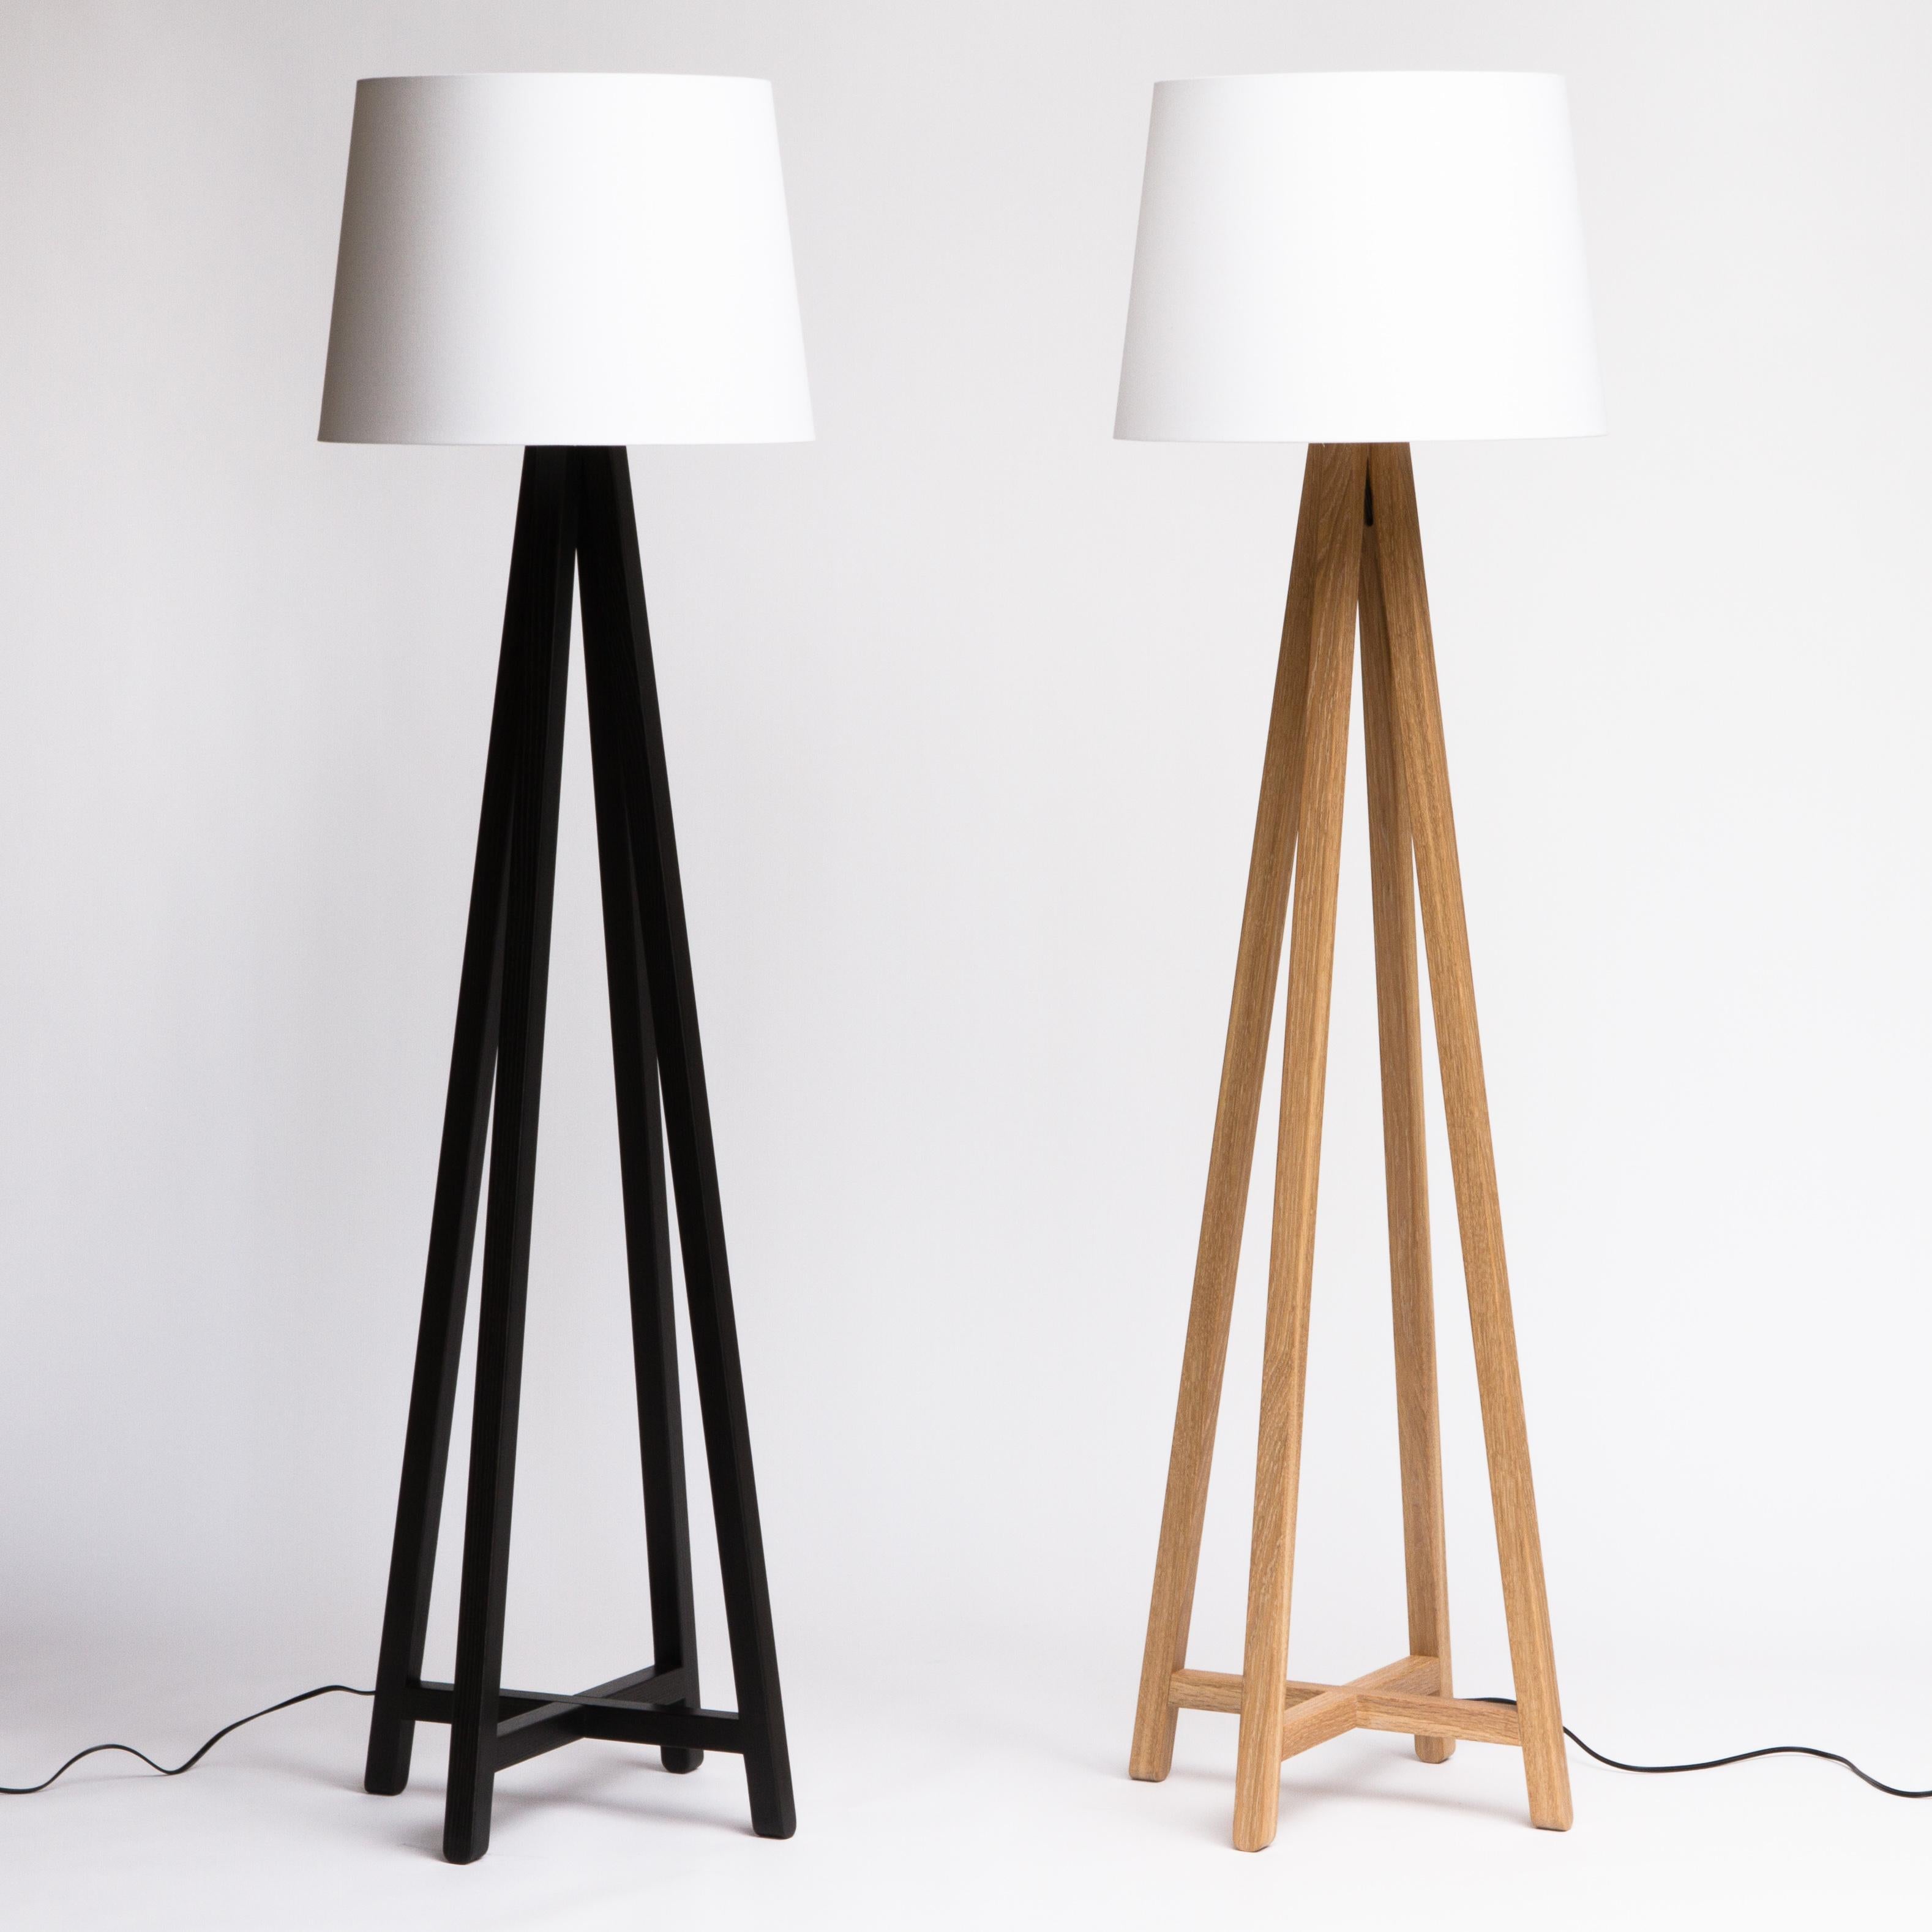 The Alpha floor lamp features a conical drum shade supported by a tapered framework of slender wooden legs. The lamp cord is hidden inside one of the legs to maintain a clean, uncluttered appearance.

Shown here is the 6’-tall Alpha Plus lamp. A